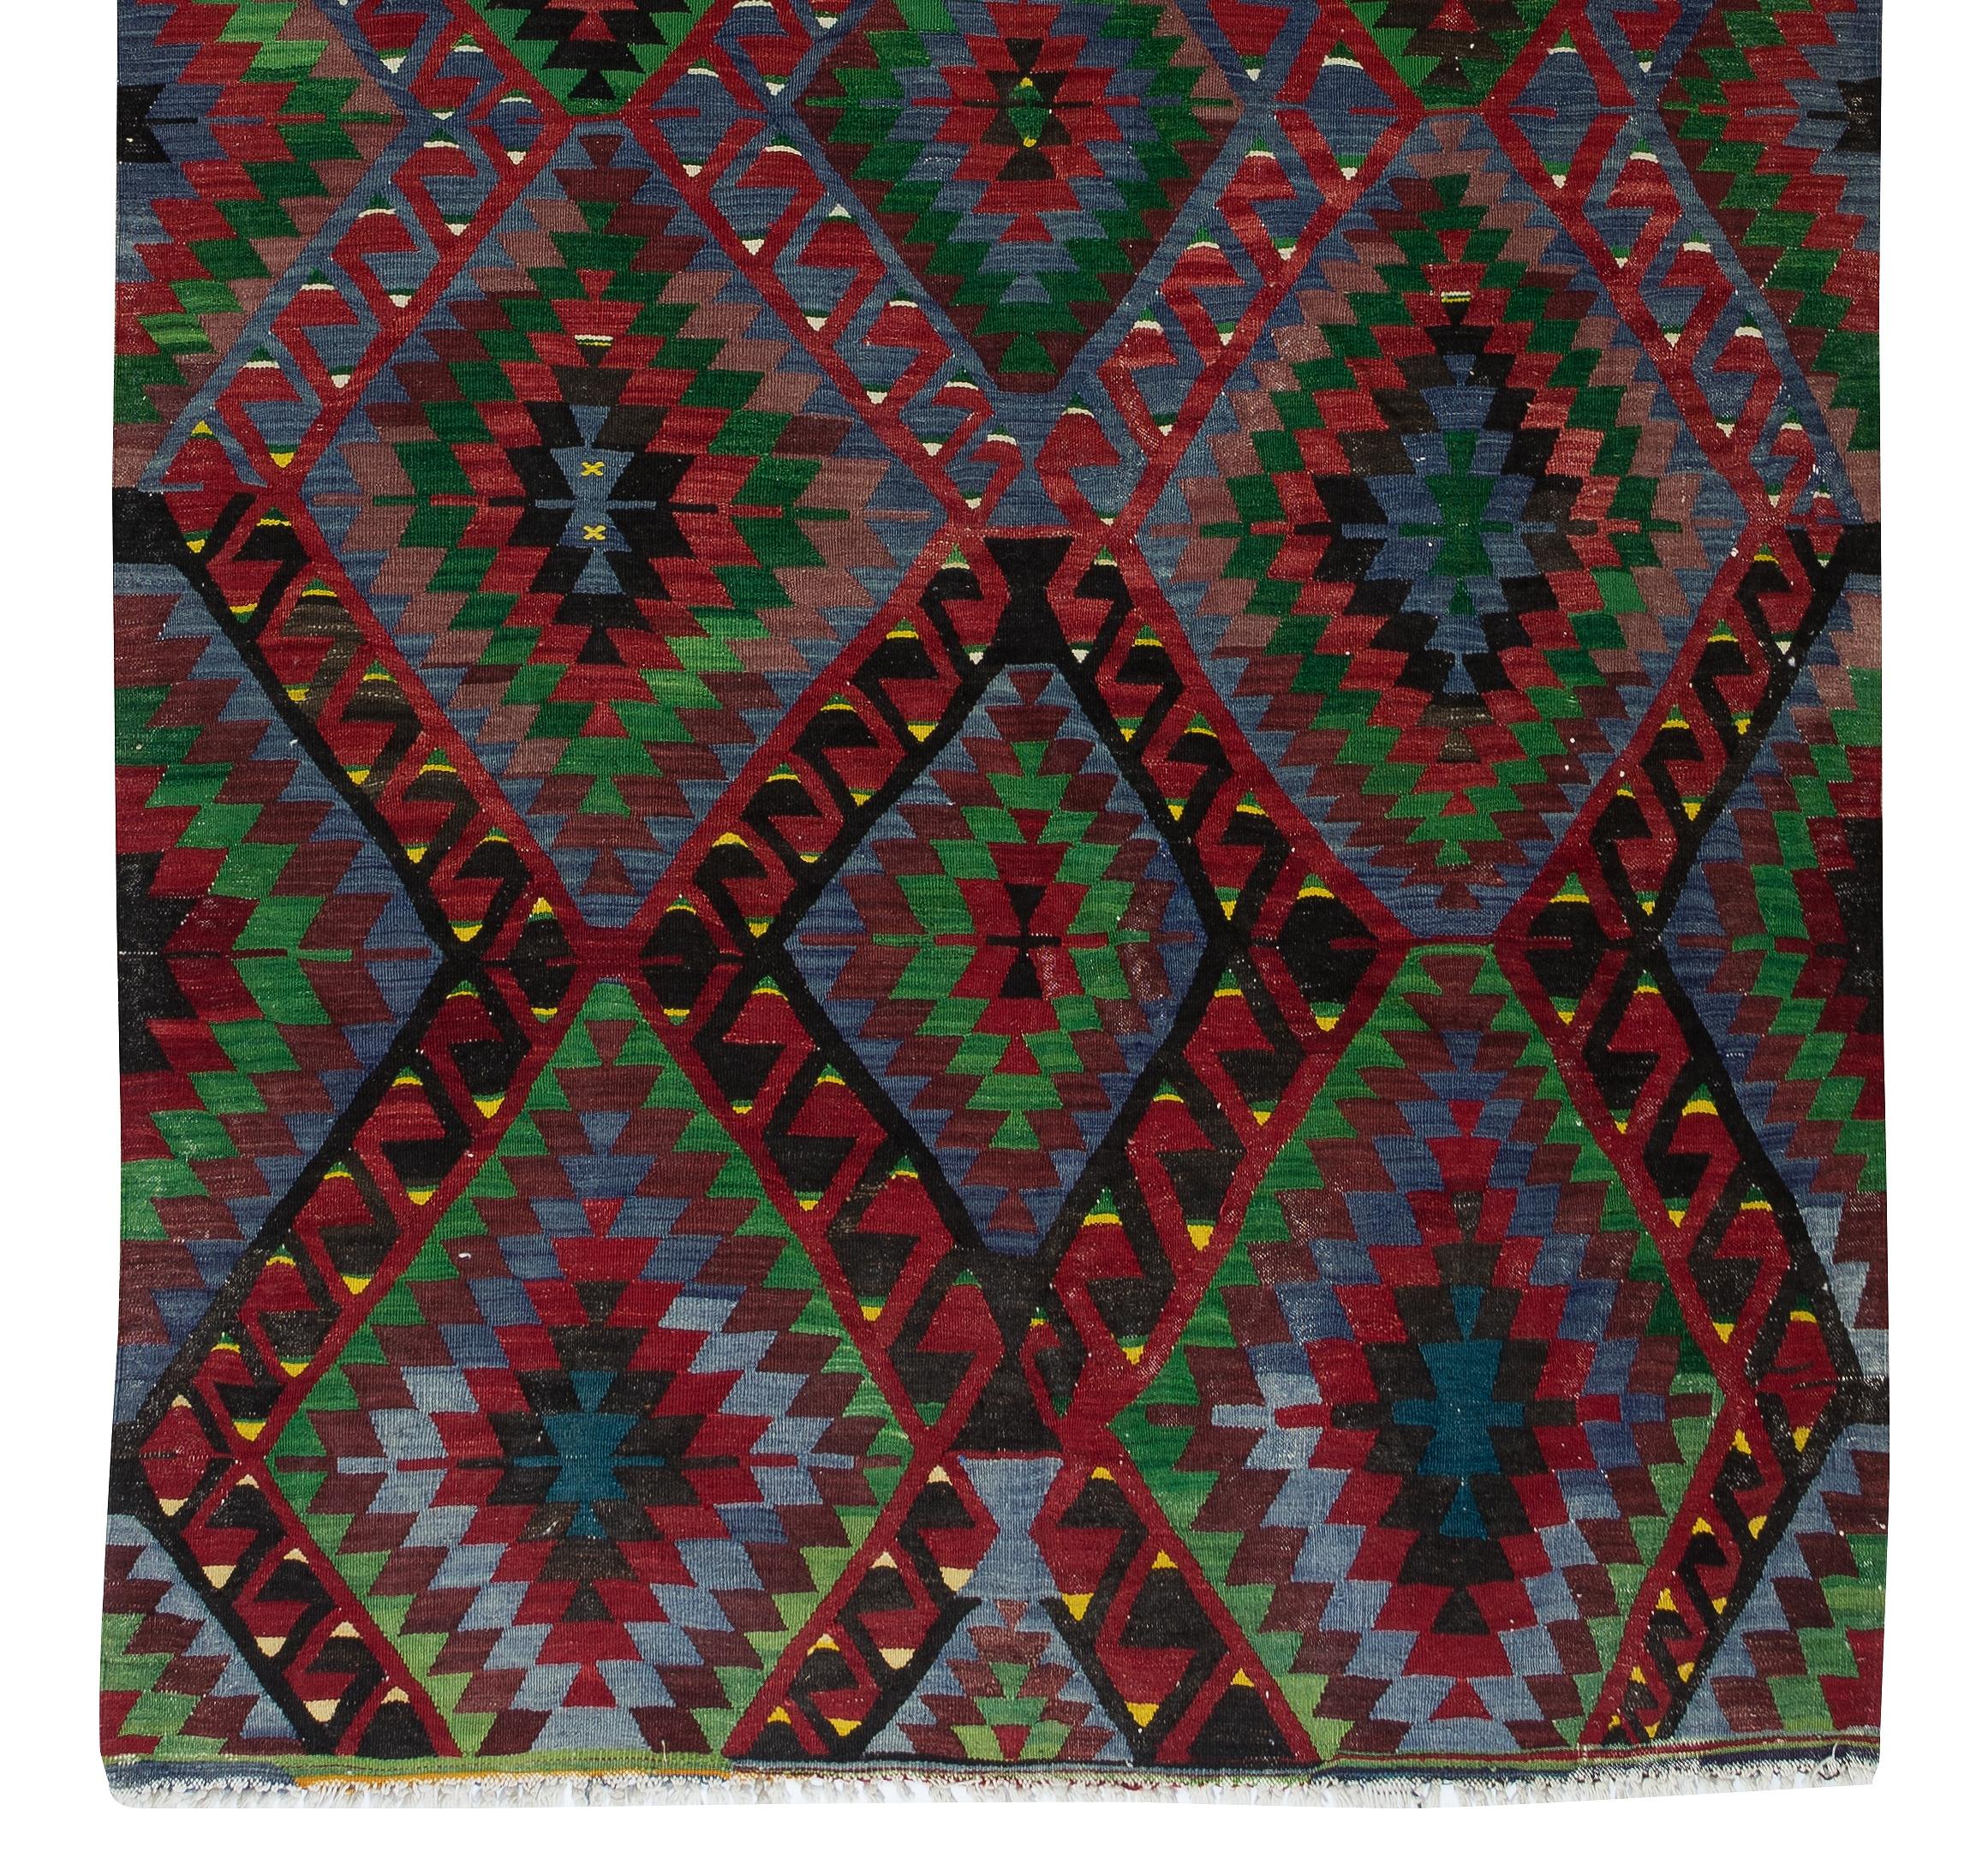 5.3x10.4 Ft Colorful Turkish Kilim with Hand-Spun Wool, Vintage Geometric Rug In Good Condition For Sale In Philadelphia, PA